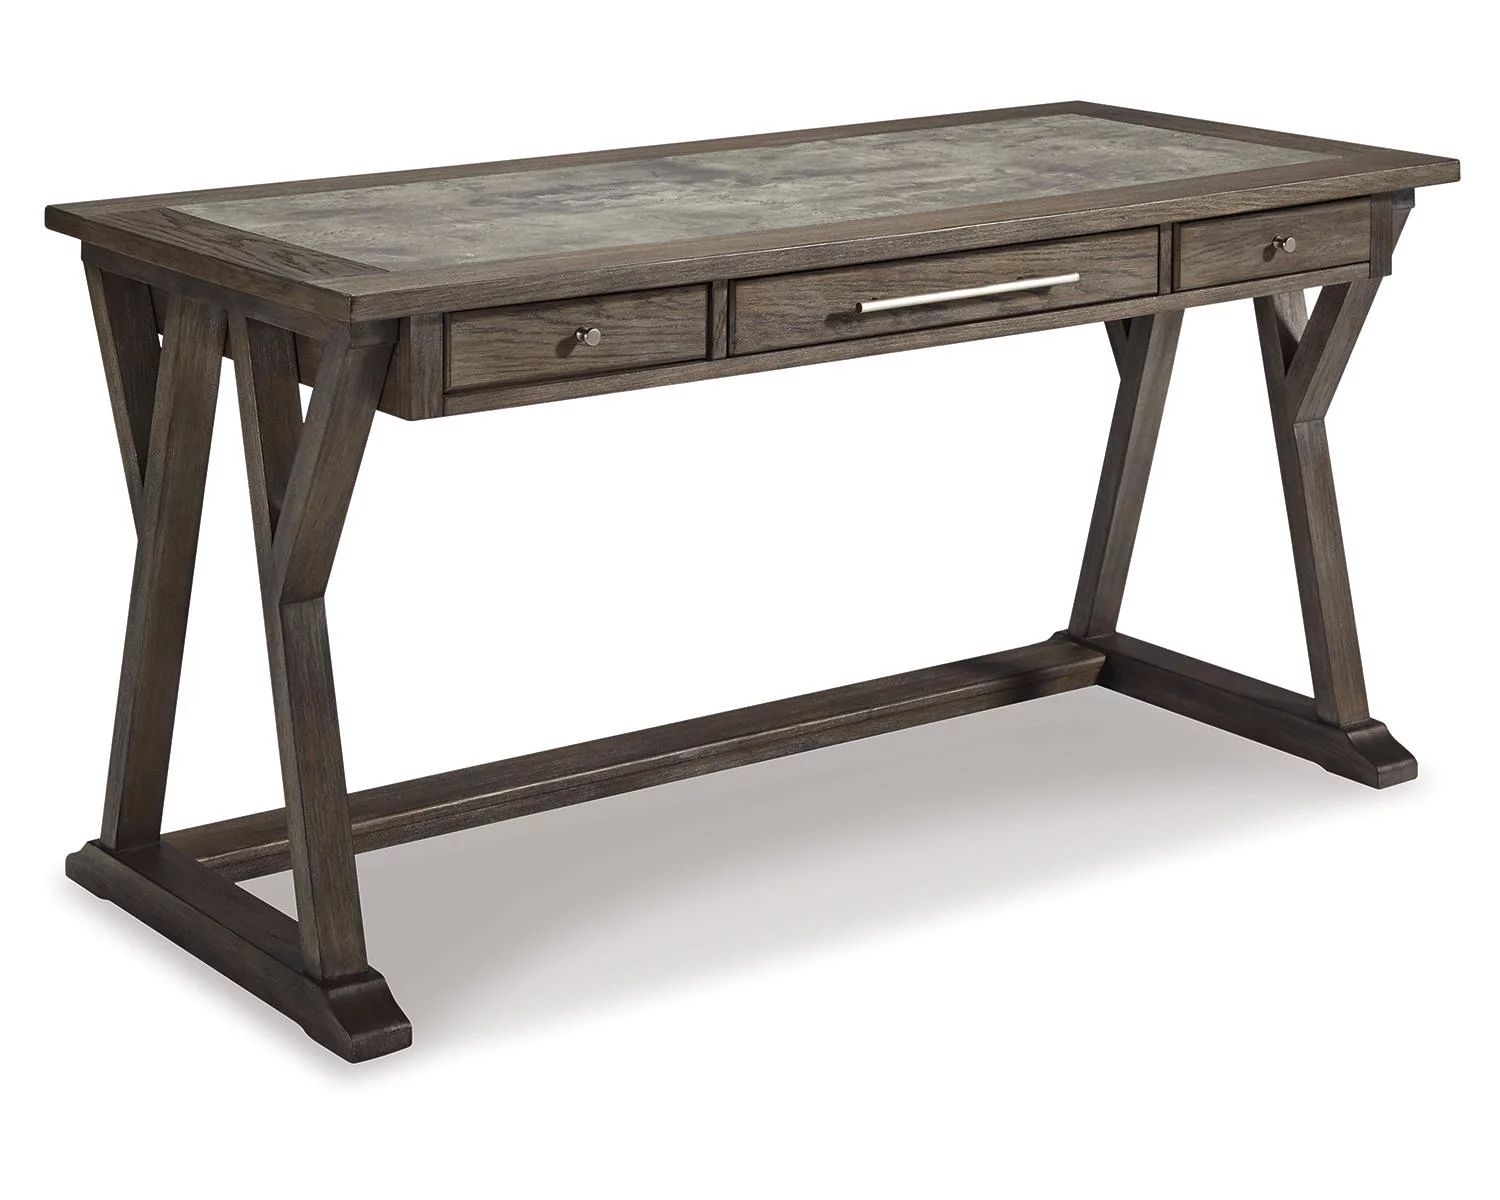 Signature Design by Ashley Luxenford Rustic Farmhouse 60 Home Office Desk with Drawers | Walmart (US)